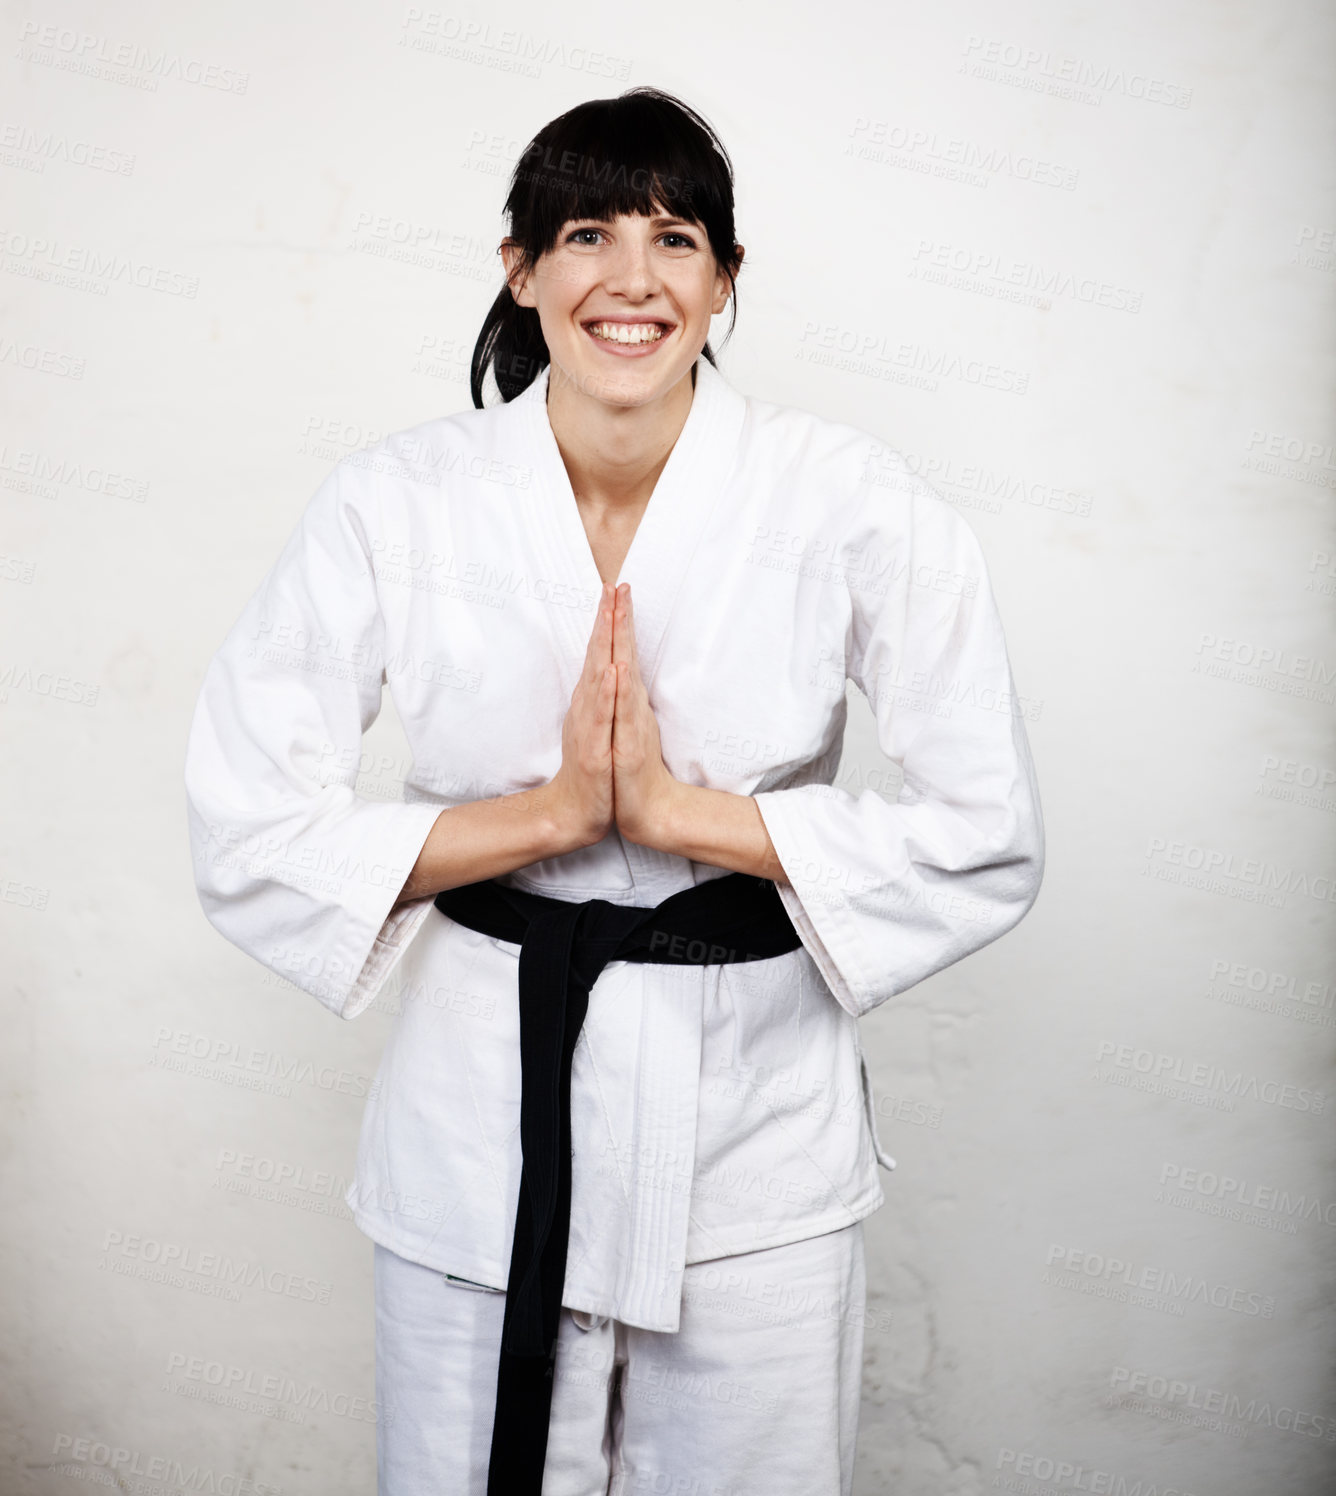 Buy stock photo Studio portrait of a young woman bowing in her karate gi